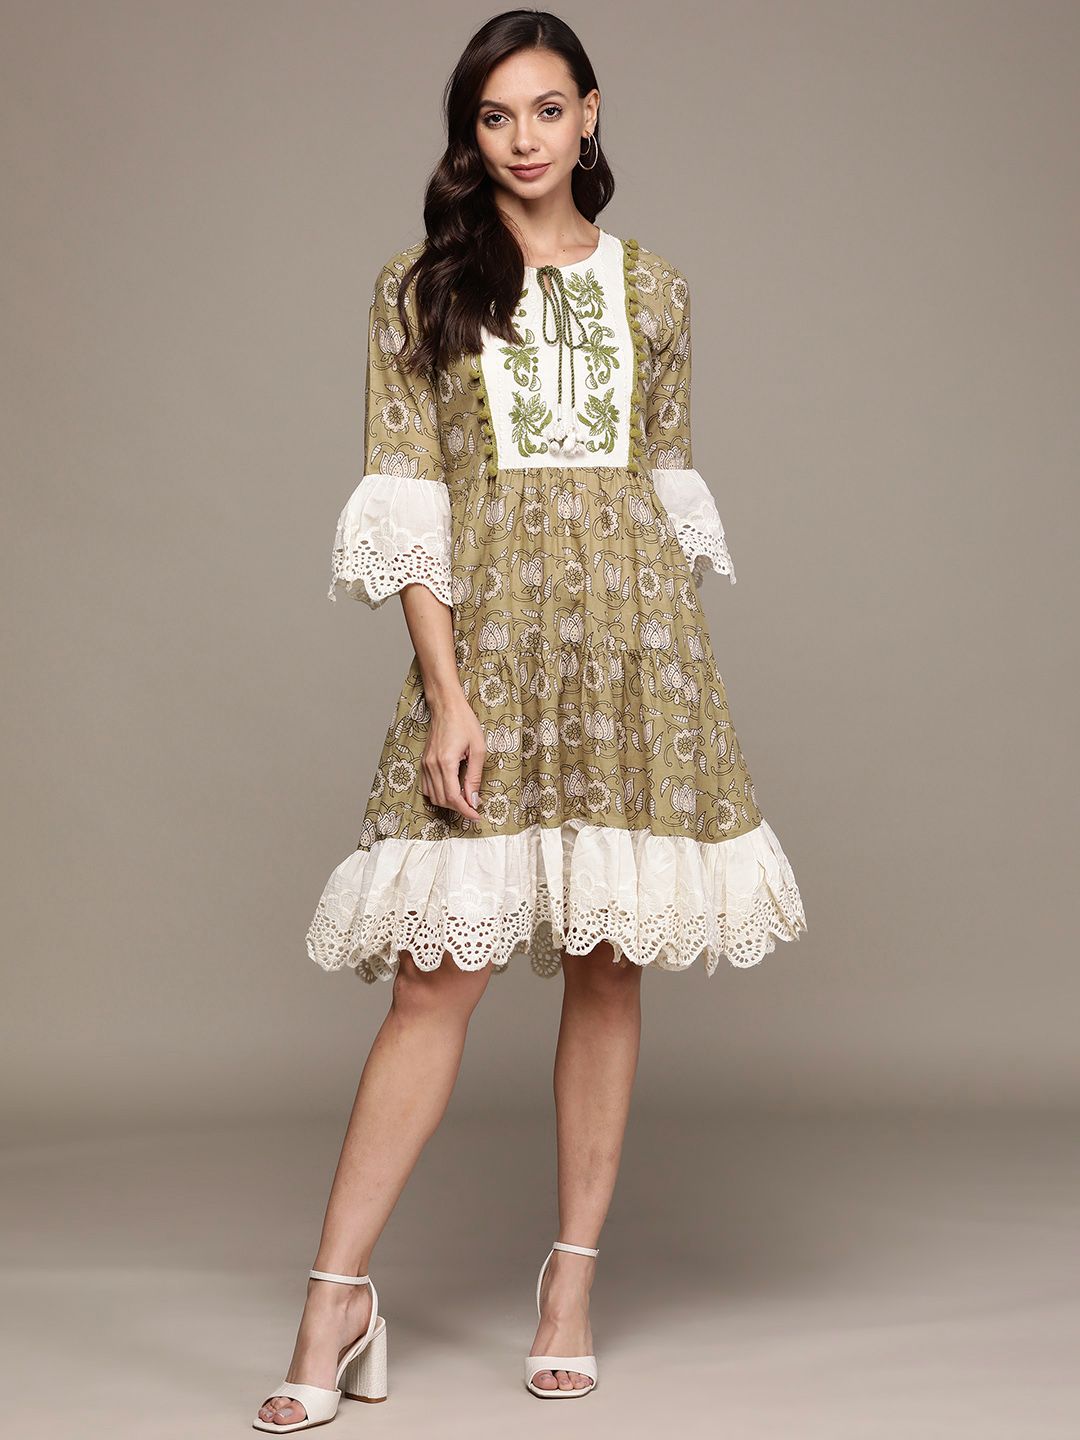 Ishin Green & Off White Ethnic Motifs Embroidered Tie-Up Neck A-Line Dress Price in India